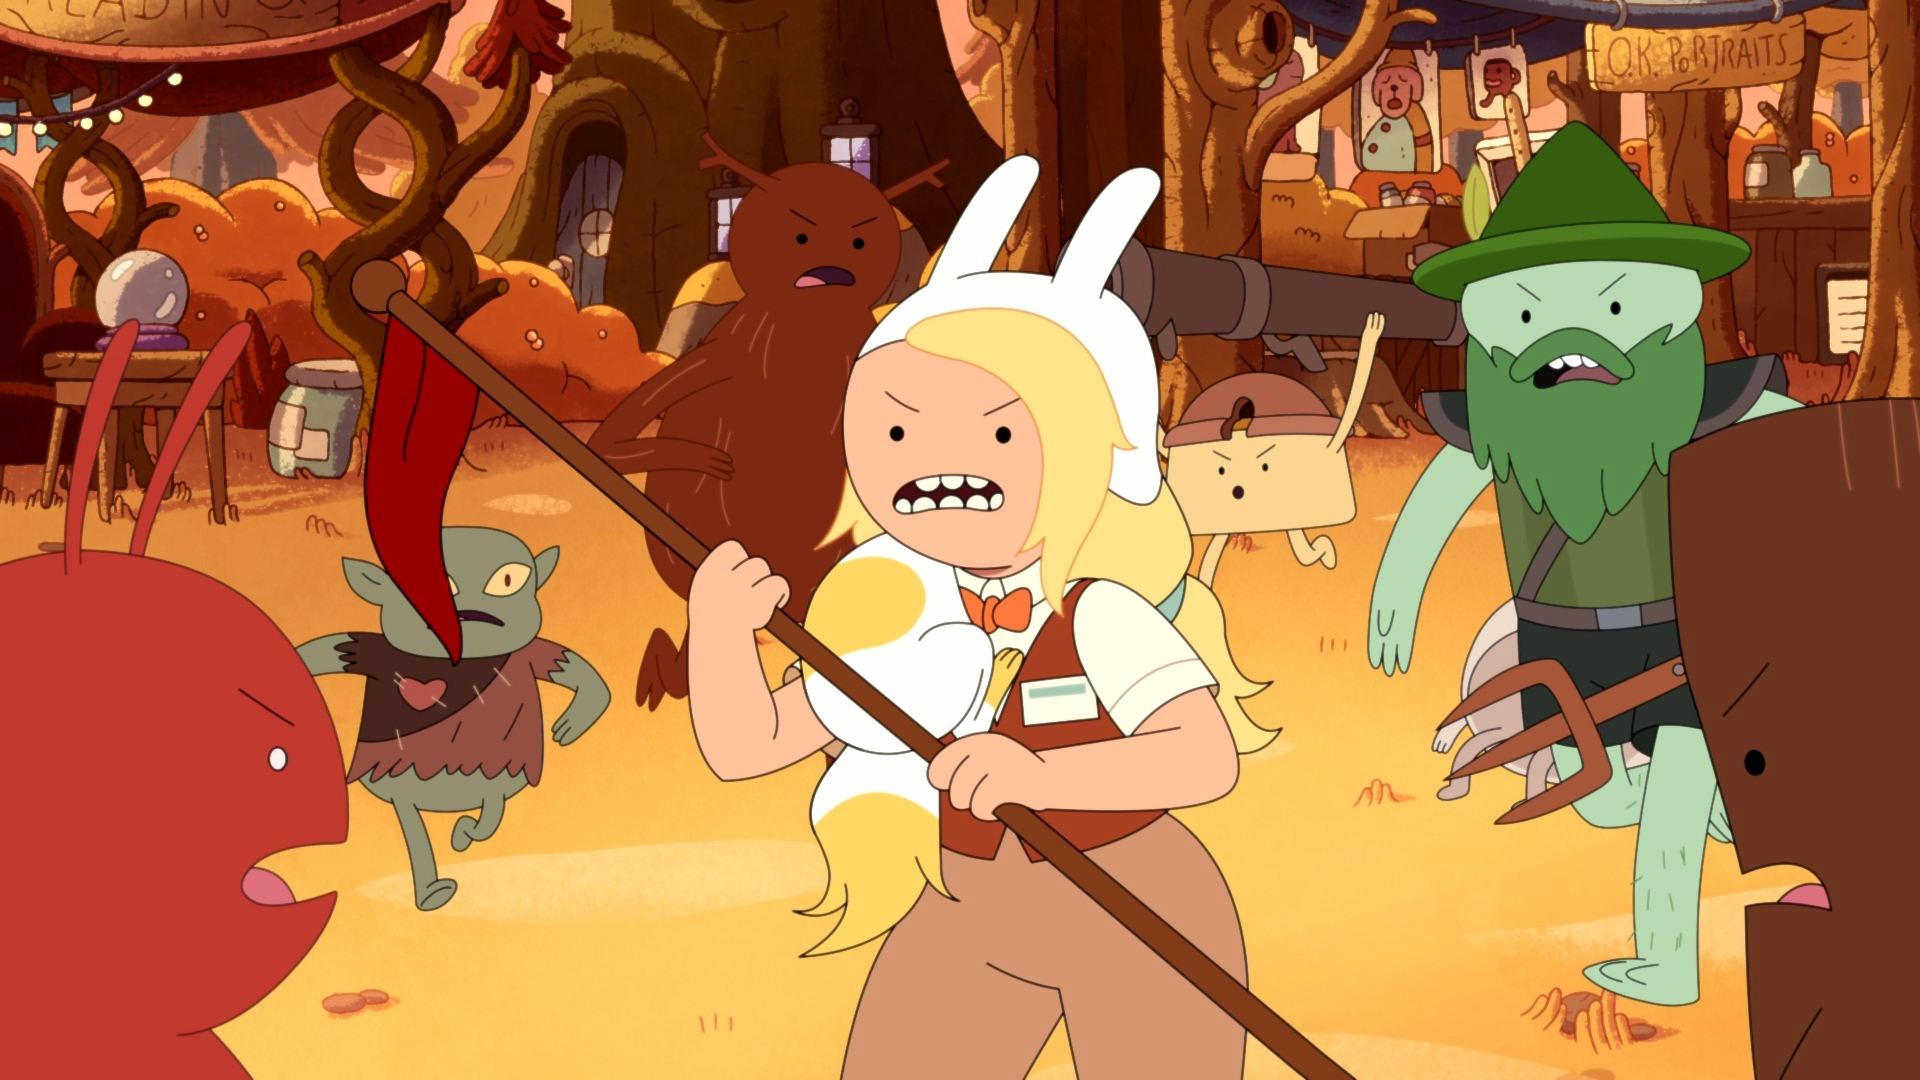 Madeleine Martin as Fionna Campbell and Roz Ryan as Cake the Cat in Adam Muto's action-adventure sci-fi fantasy comedy animated series, Adventure Time Fionna and Cake Episode 3